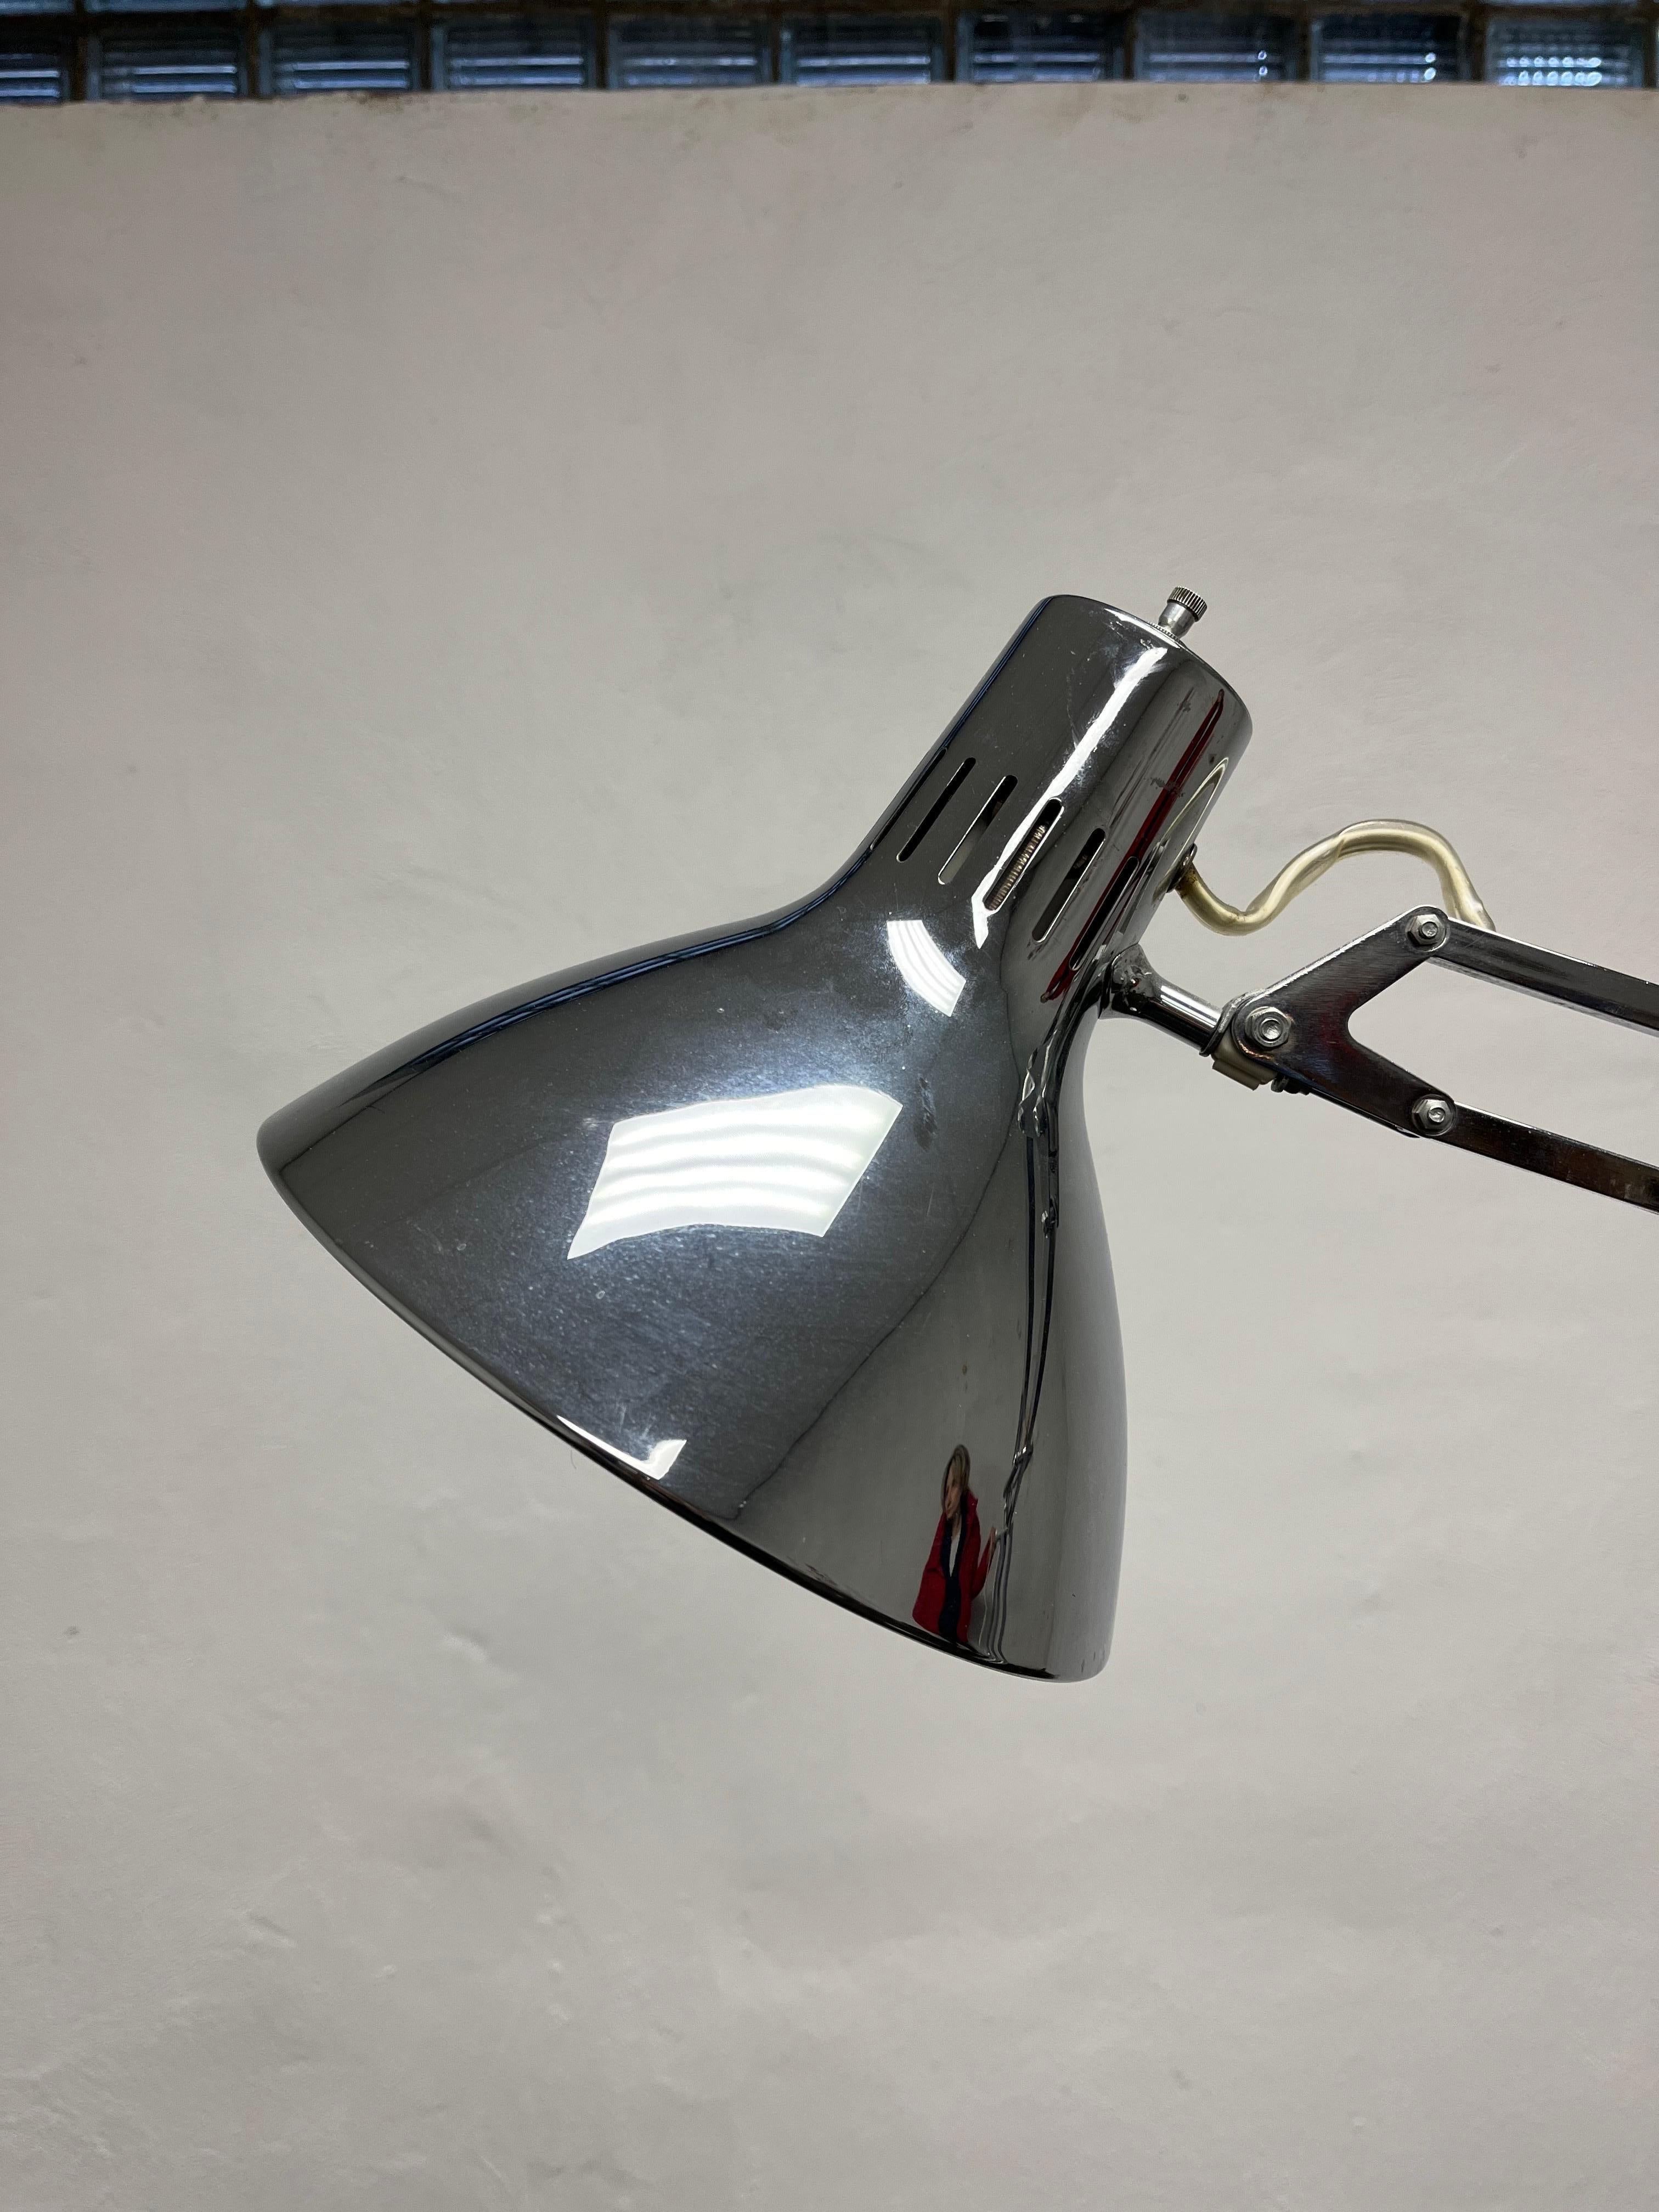 This is a beautiful chrome floor lamp designed by Jac Jacobsen circa 1960. The fixture retains excellent bright surfaces and perfect adjustment function. Nice contrasting base in aluminum.
Curbside to NYC/Philly $300